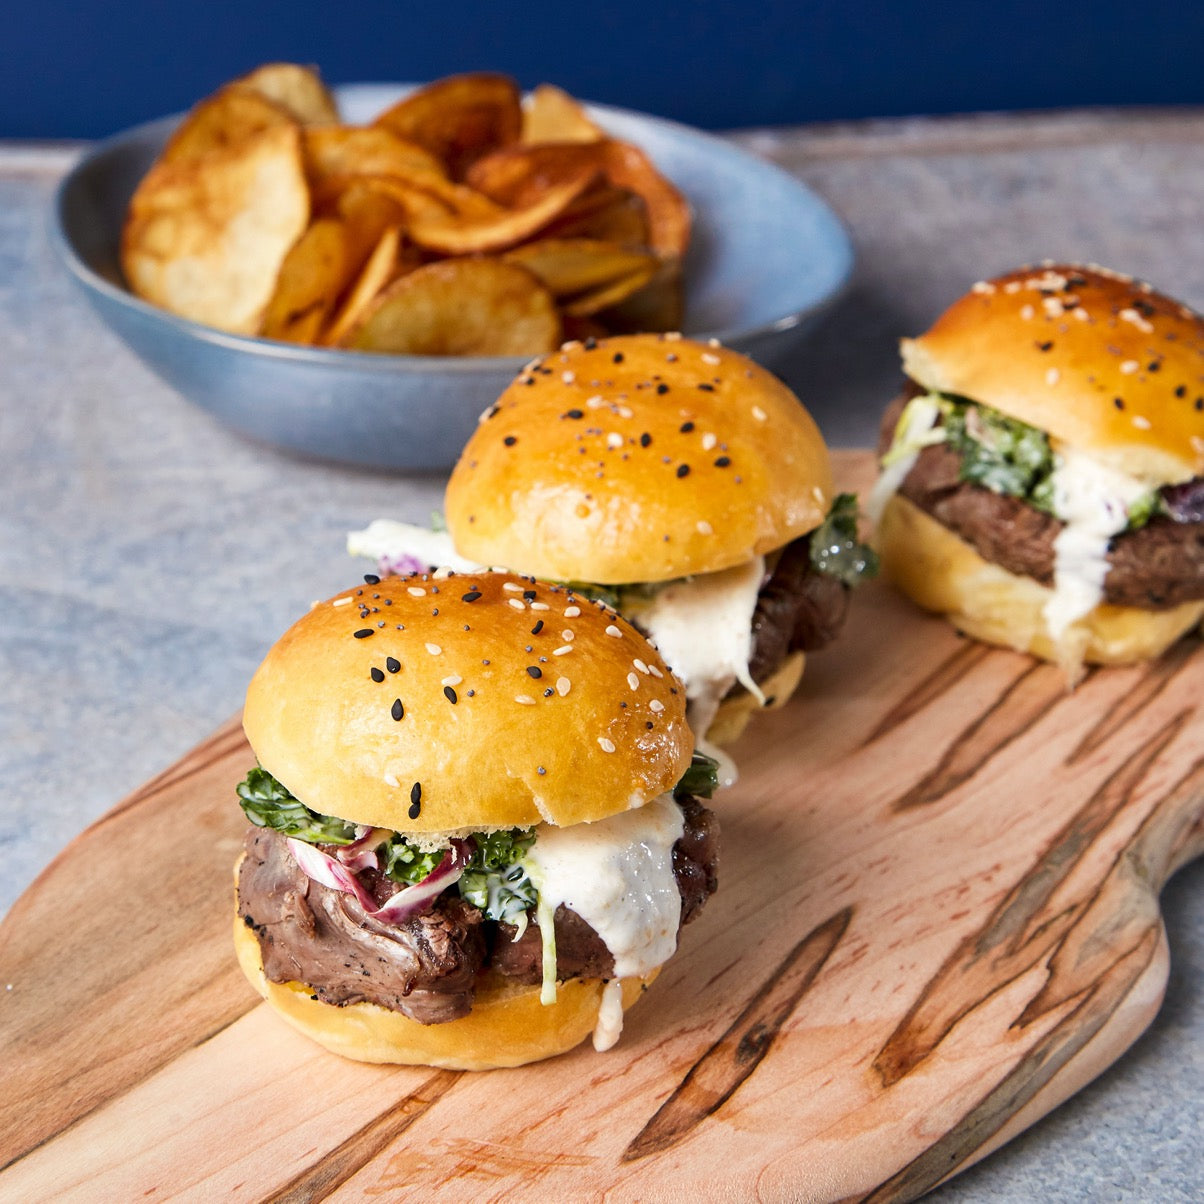 Three Filet Sliders on housemade brioche with truffle salt housemade chips